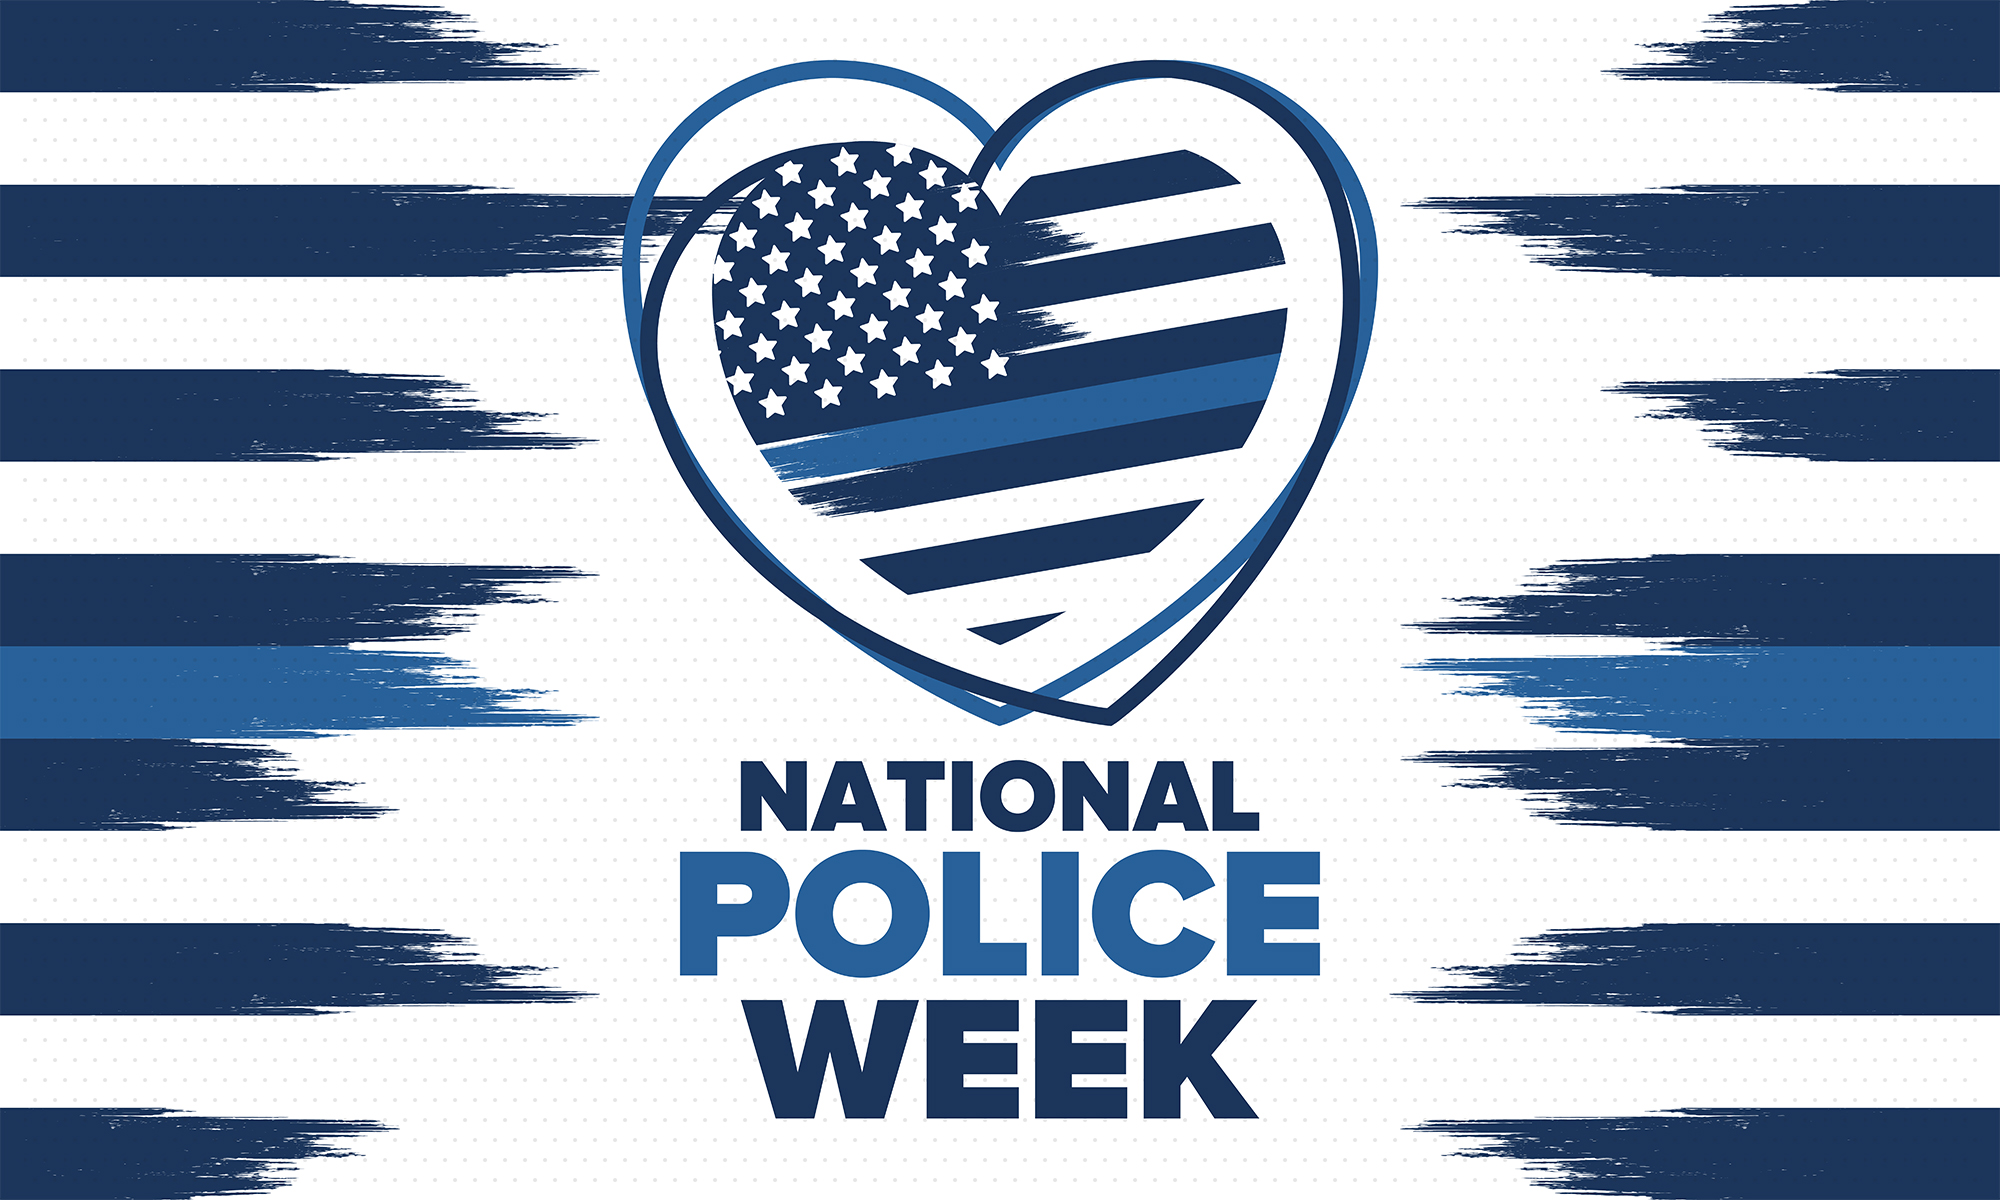 Police Week Ceremony - Township of North Brunswick